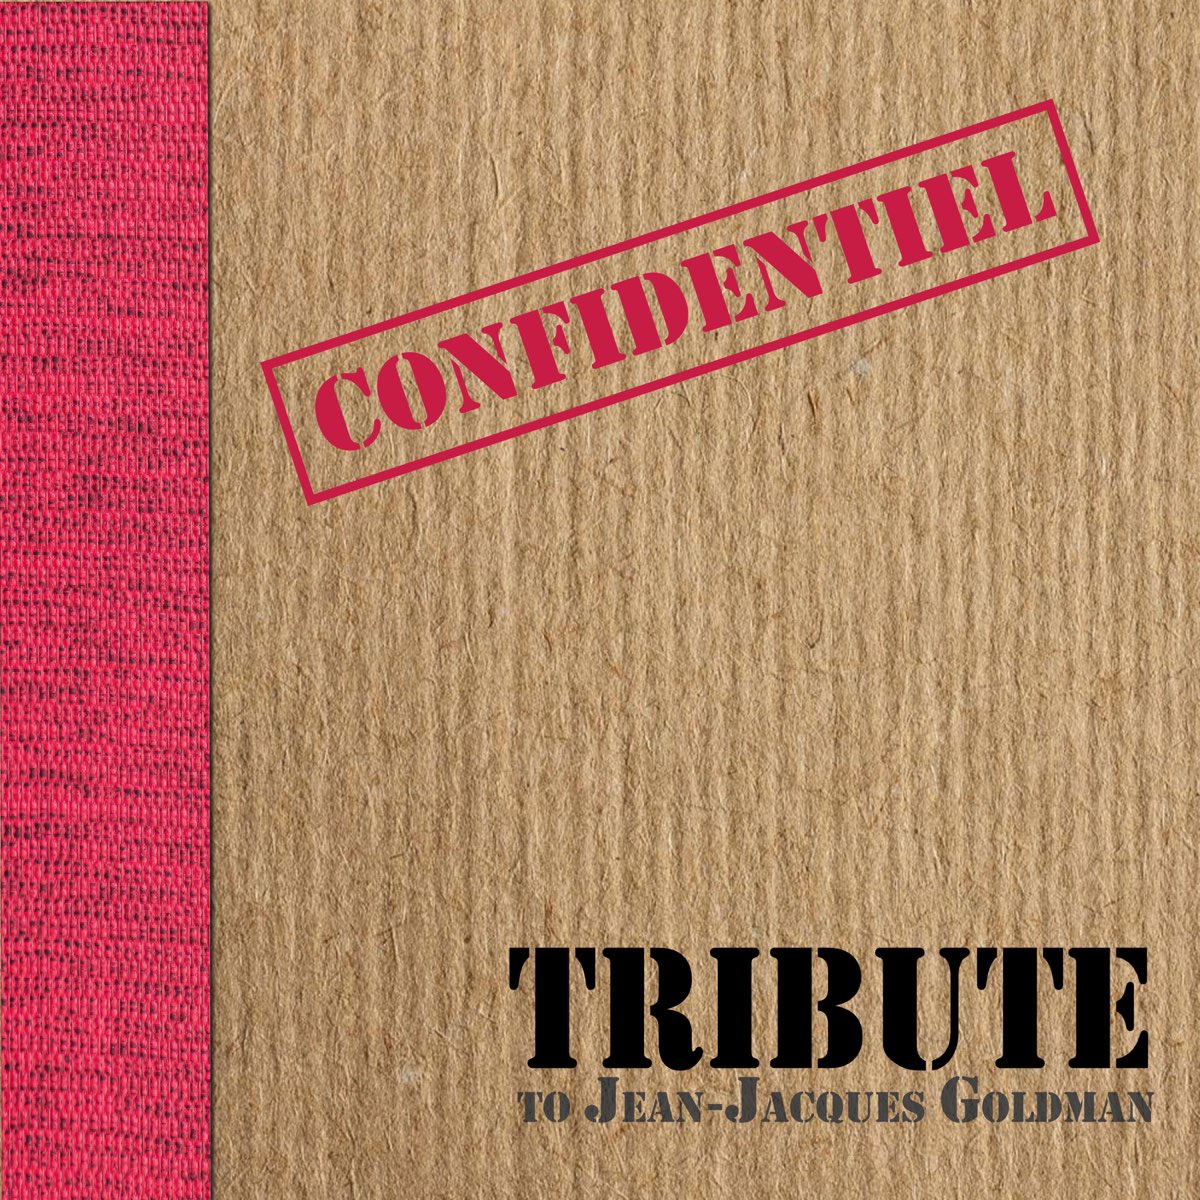 Tribute to Jean-Jacques Goldman by Confidentiel on Apple Music